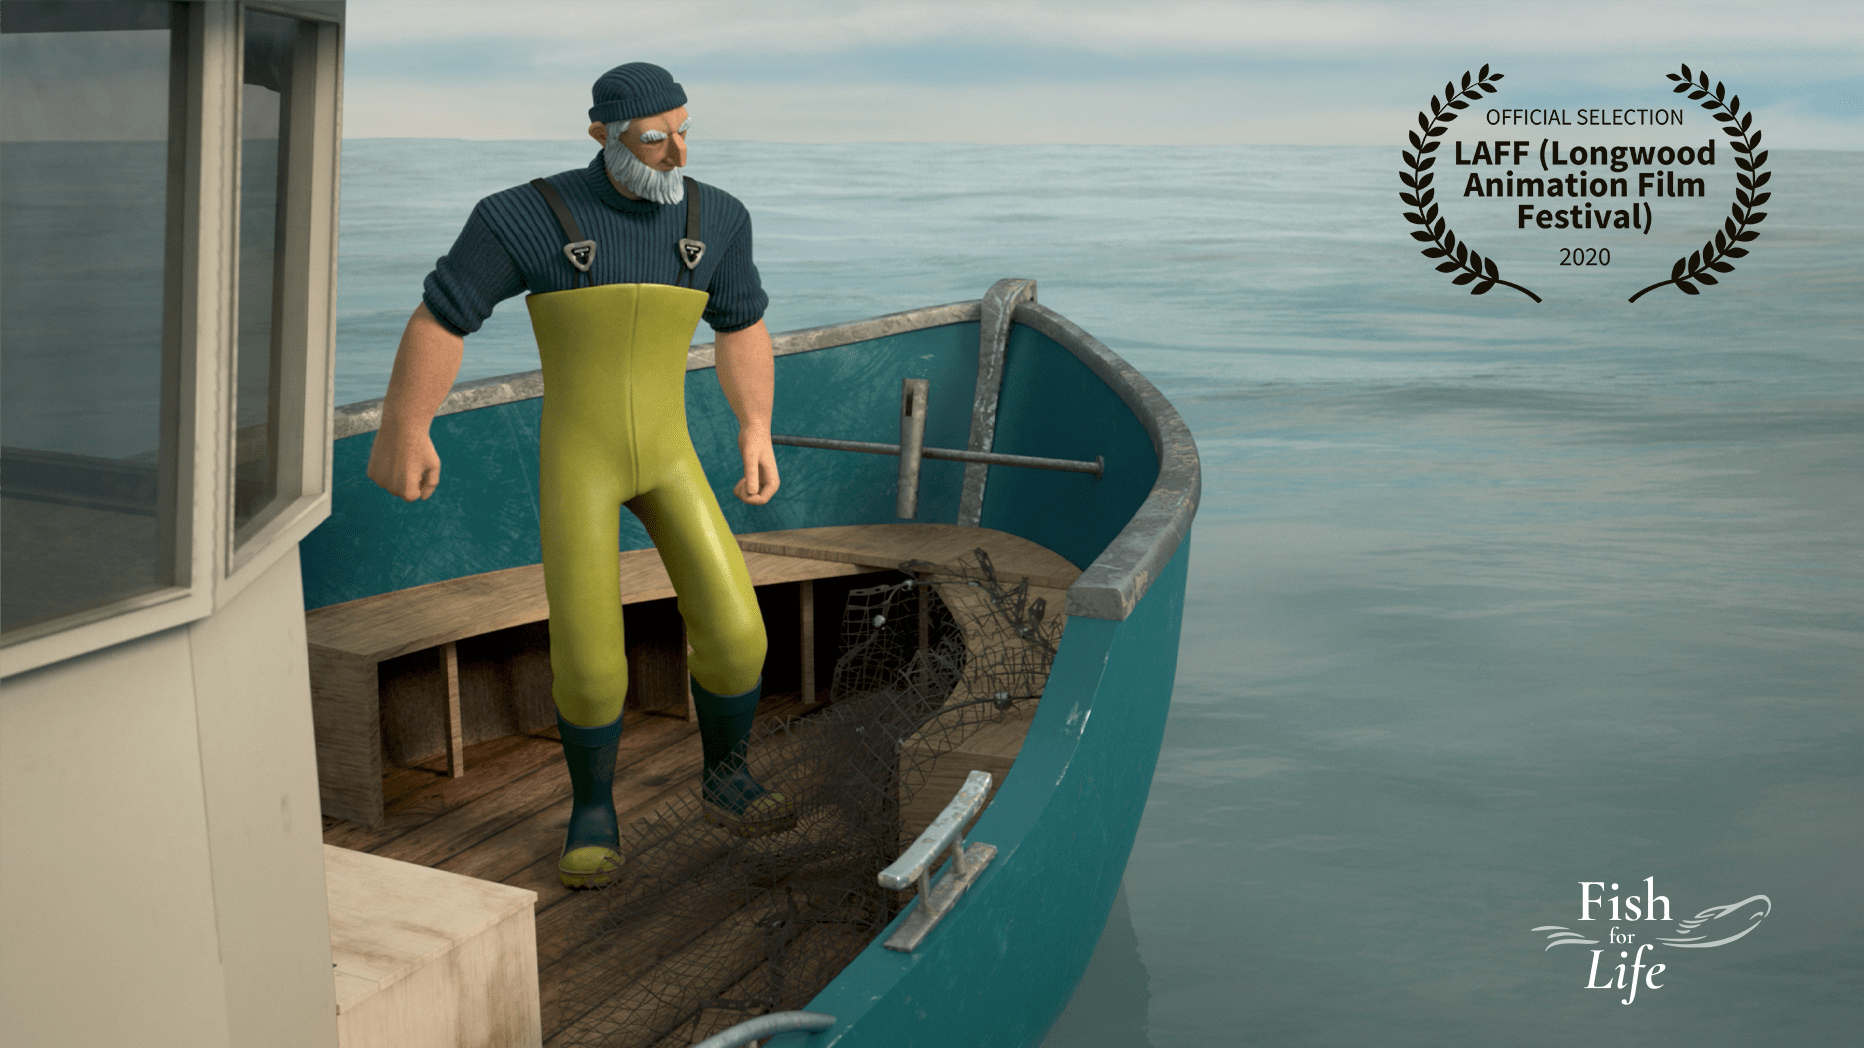 Fis for Life official selection LAFF